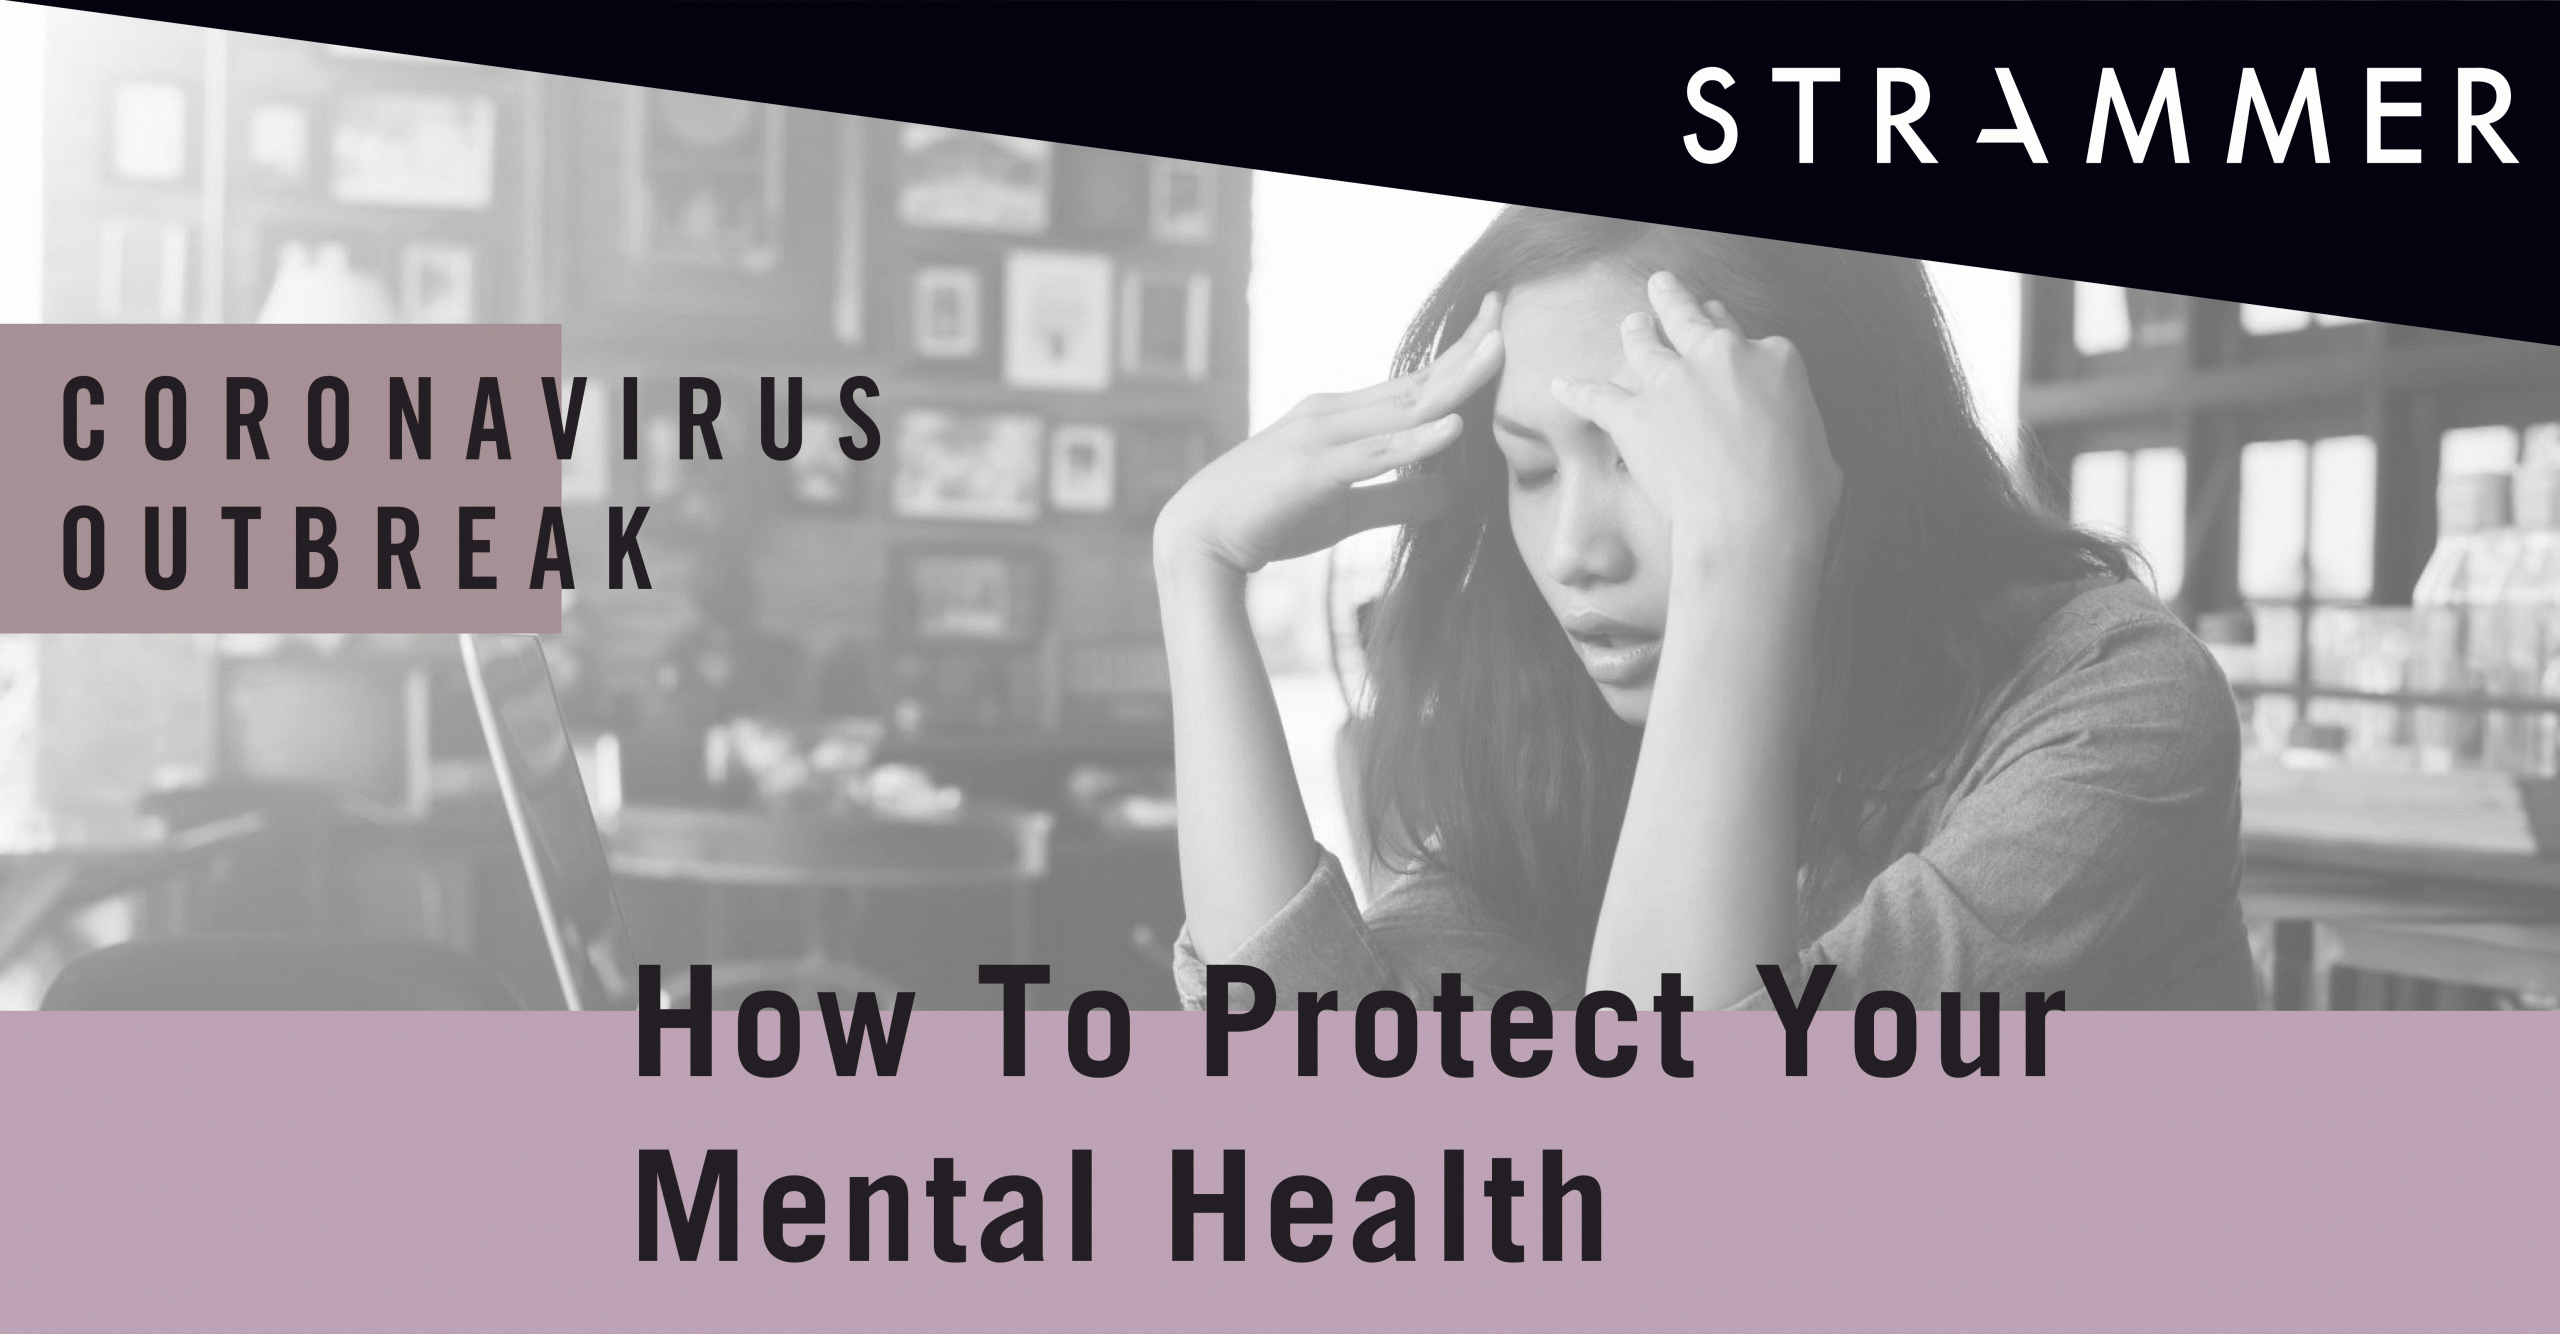 How To Protect Your Mental Health During Coronavirus